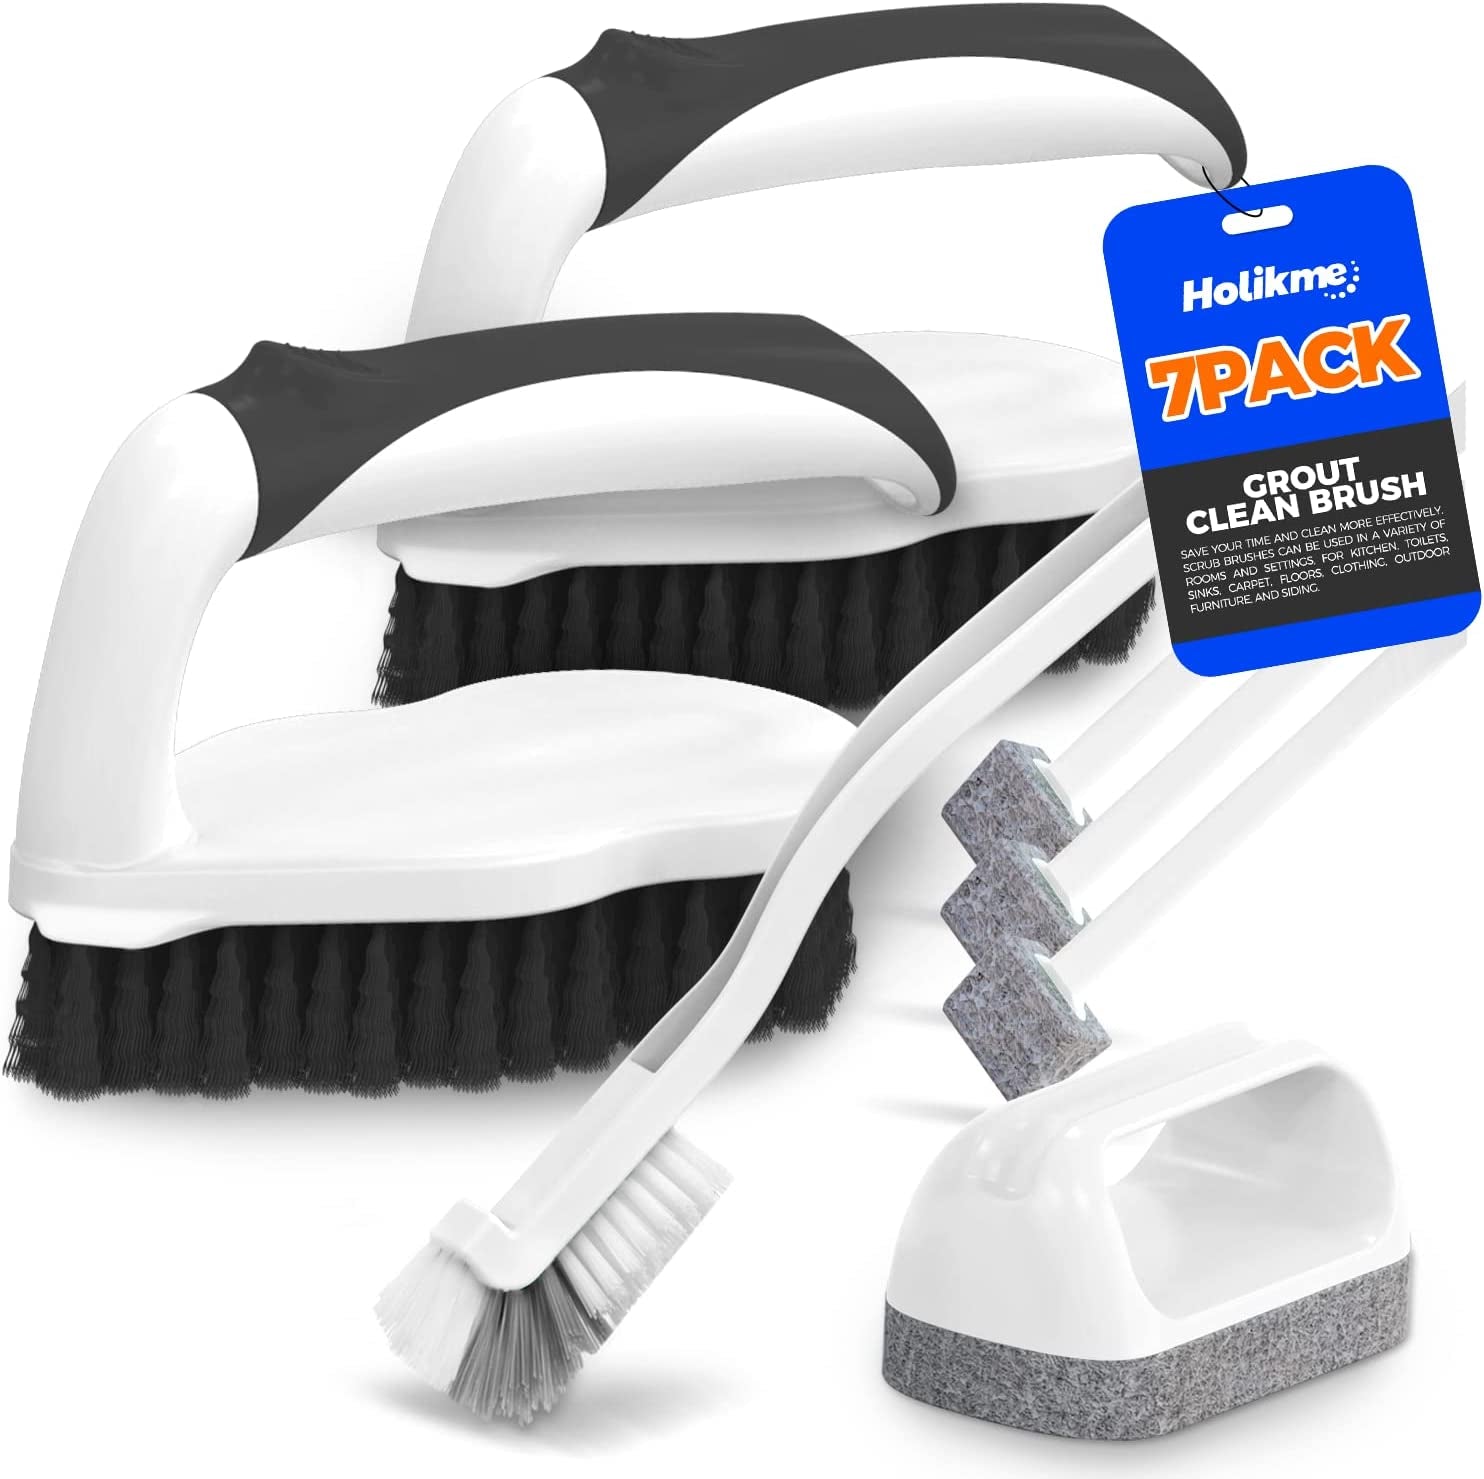 7-Piece Deep Cleaning Brush Set for Bathroom and Kitchen